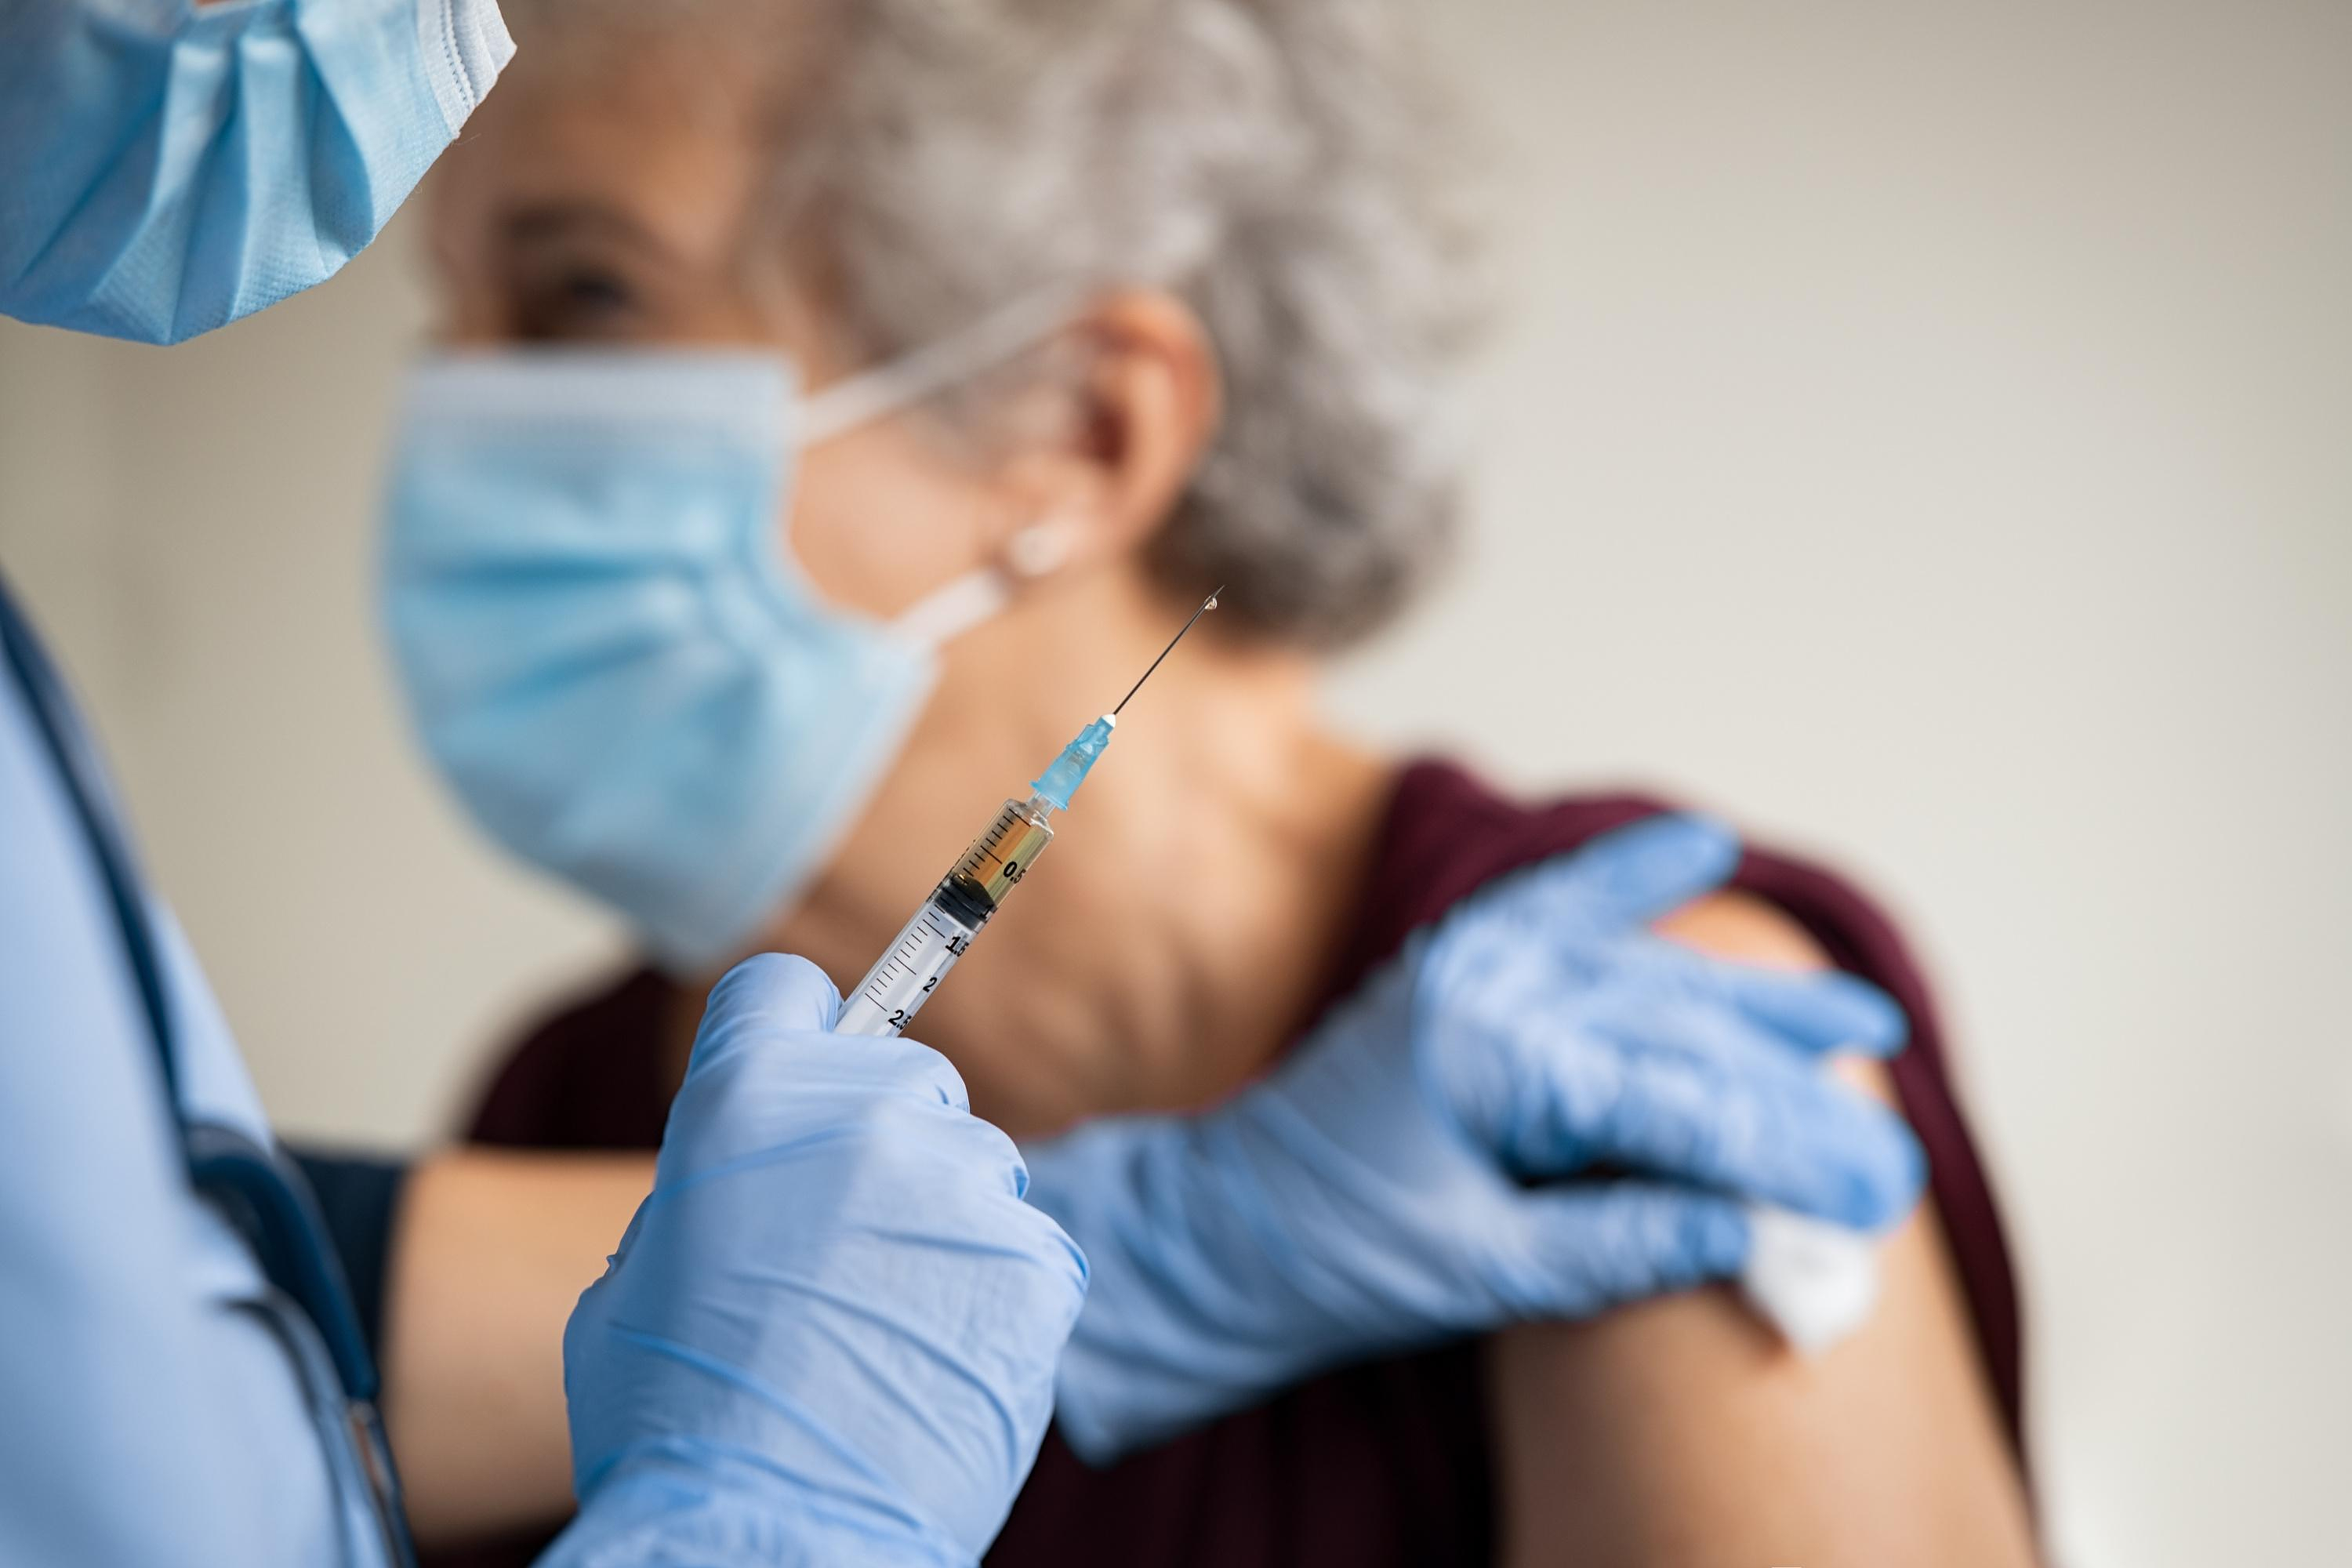 Covid-19: everything you need to know about the new vaccination campaign which is starting